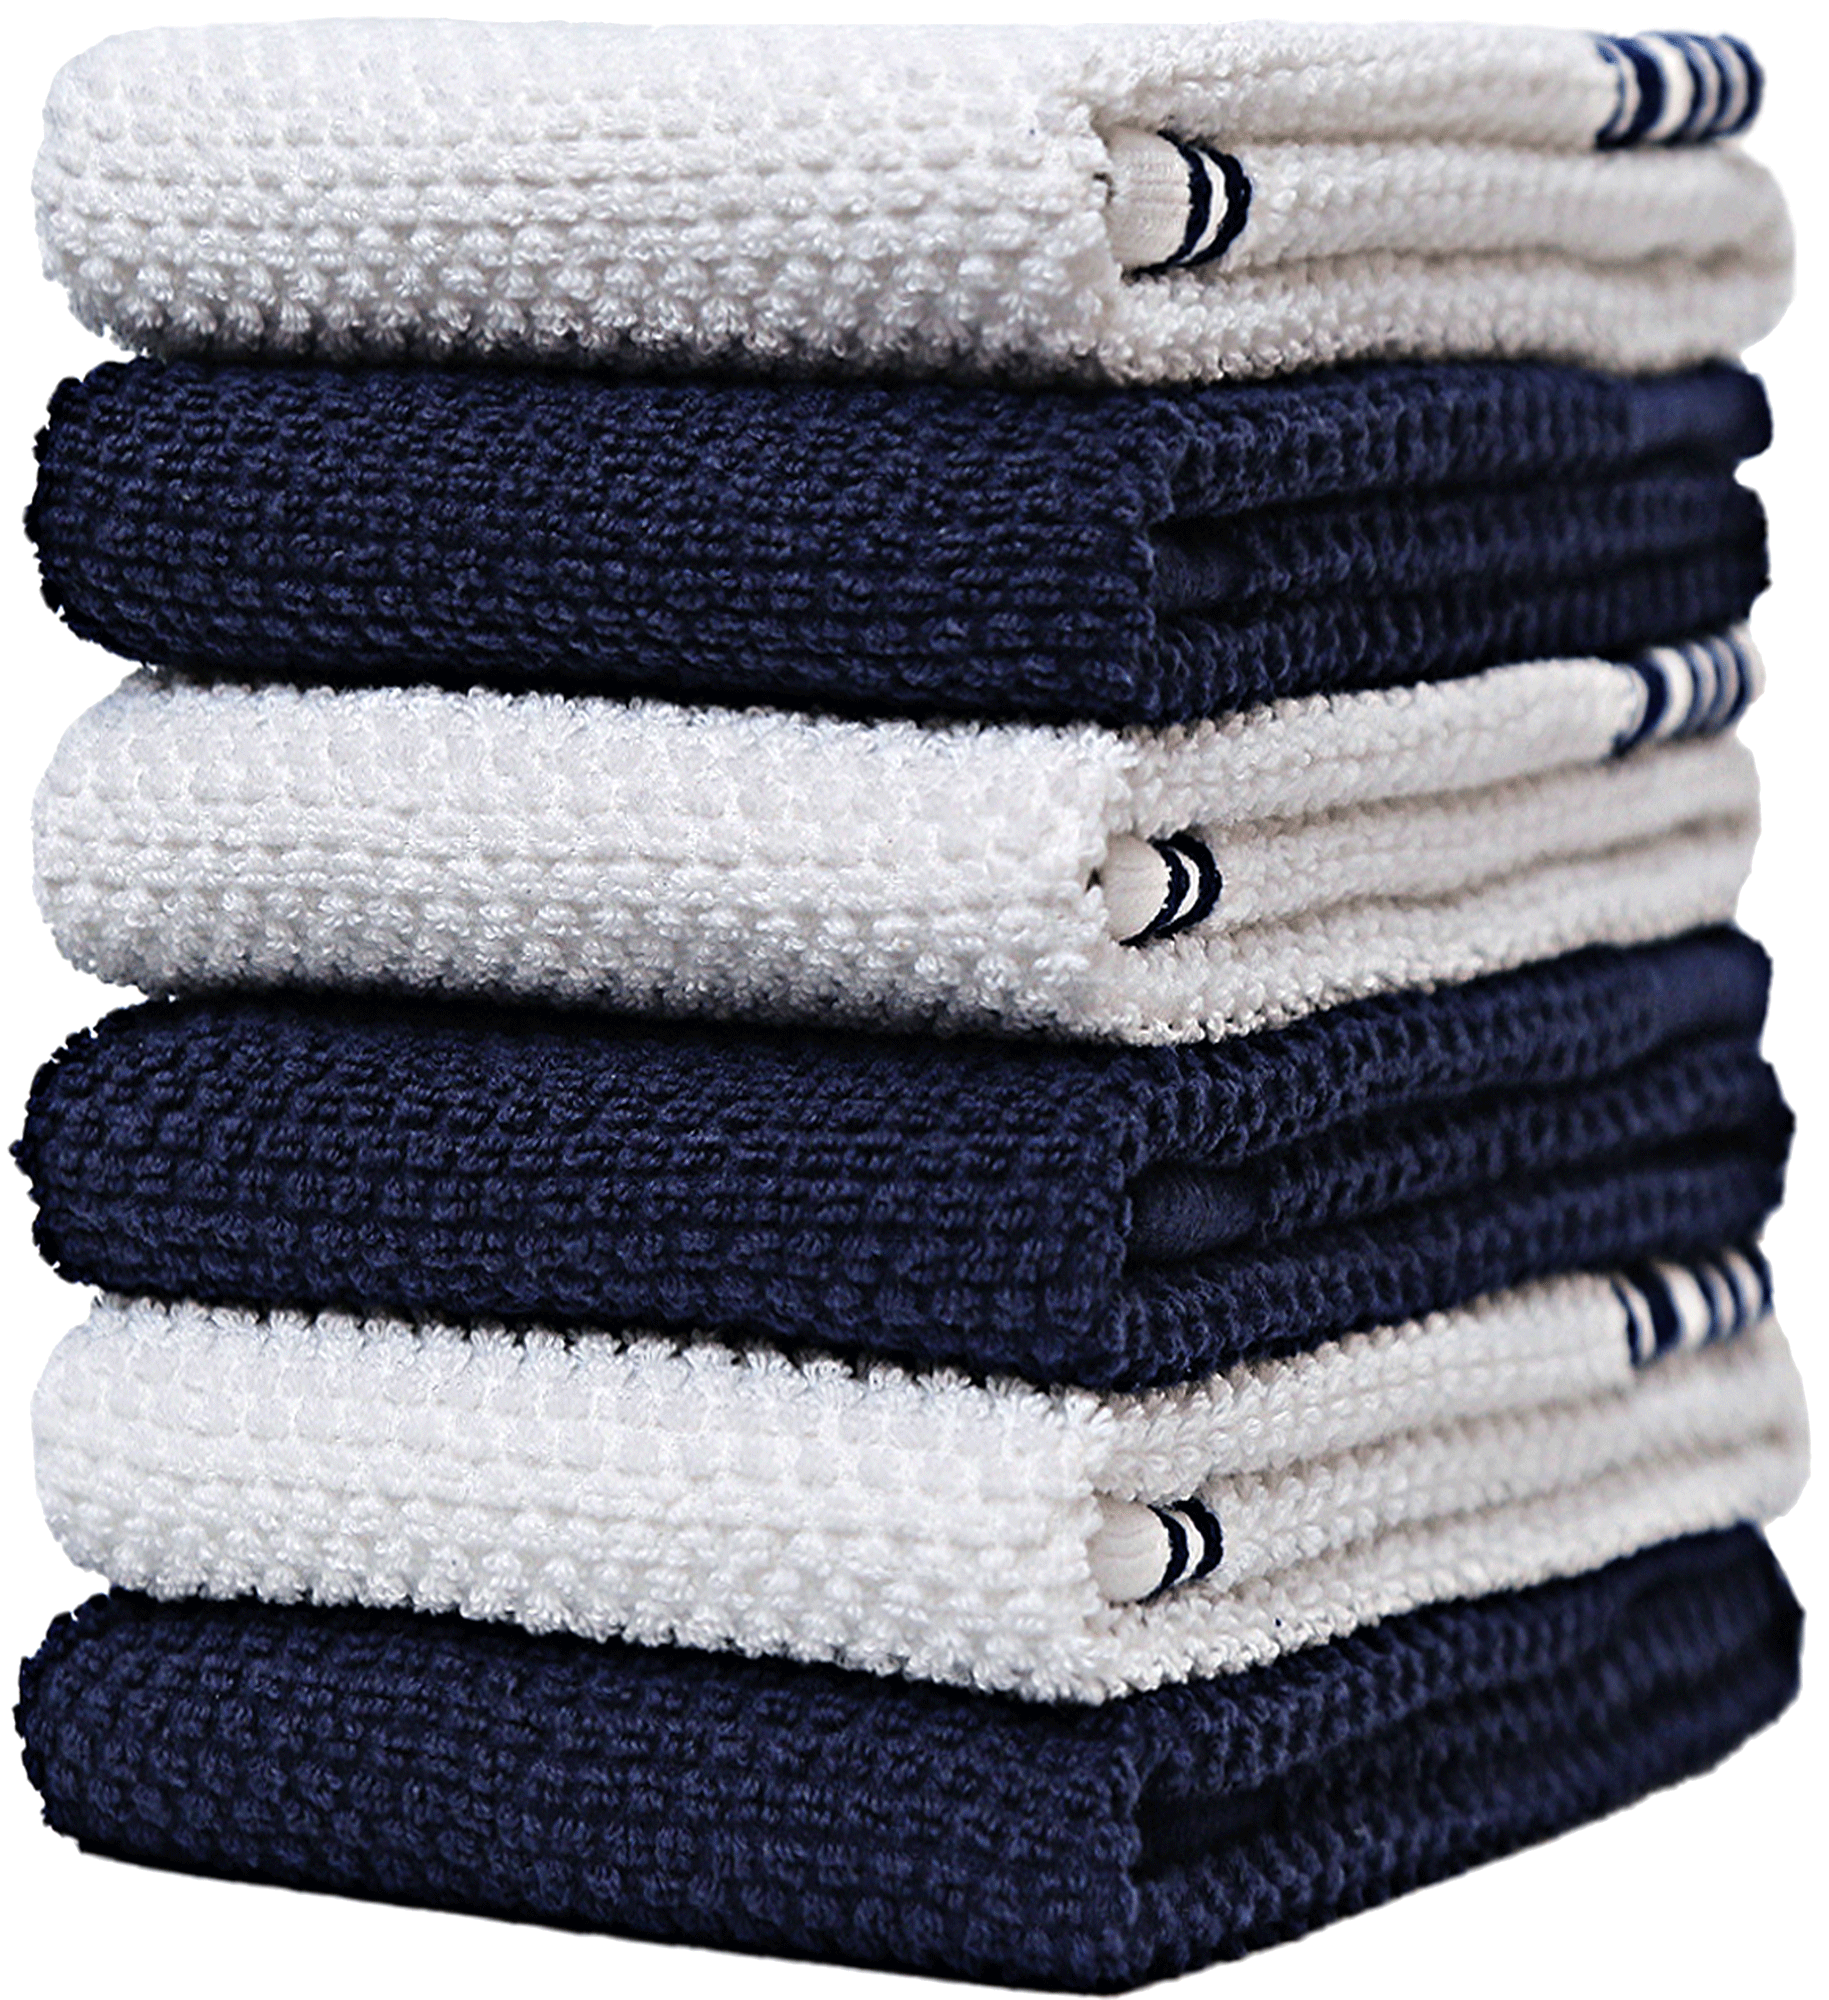 Weft Insert Kitchen Towels - Best Quality in Cheap Price – Bumble